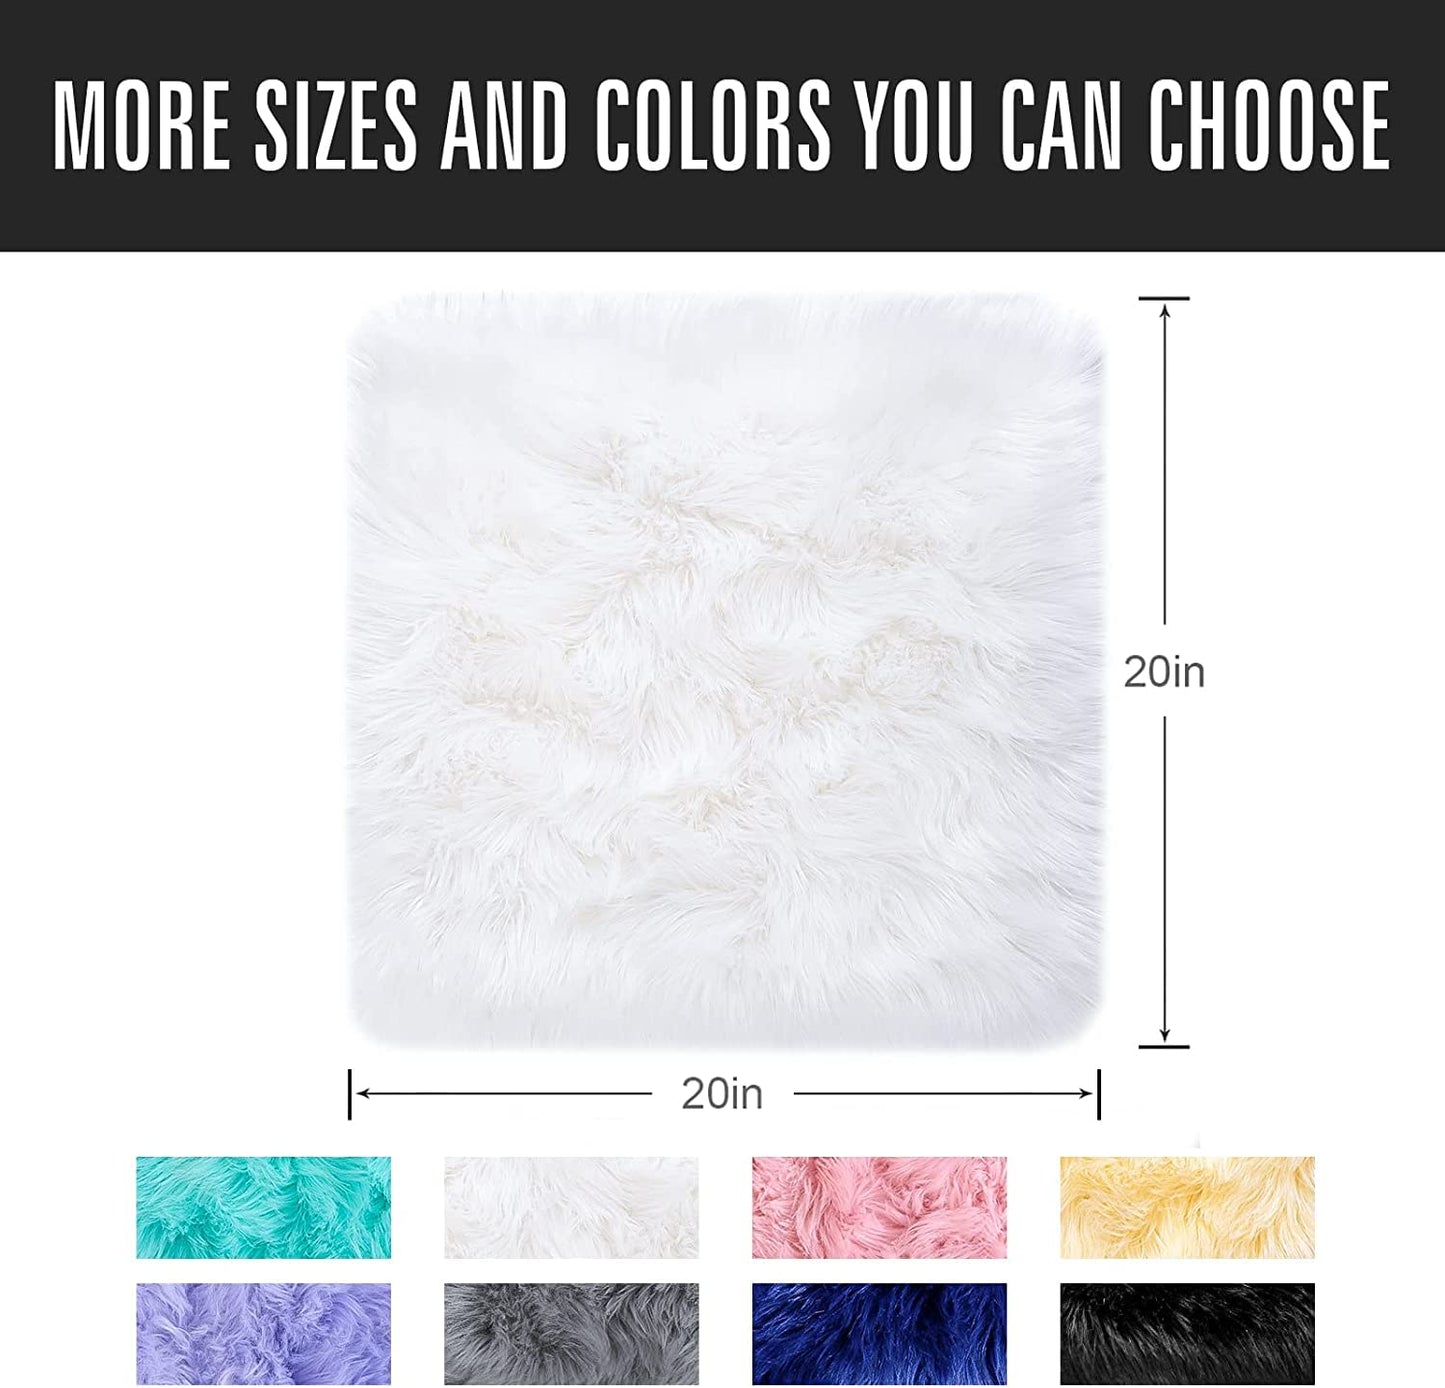 Floor Mats: Luxury 1.5 Feet Faux Fur Sheepskin Rugs Ultra Soft Fluffy Chair Cover Seat Cushion Pad Area Rugs Shaggy Wool (White Square, 18x18)